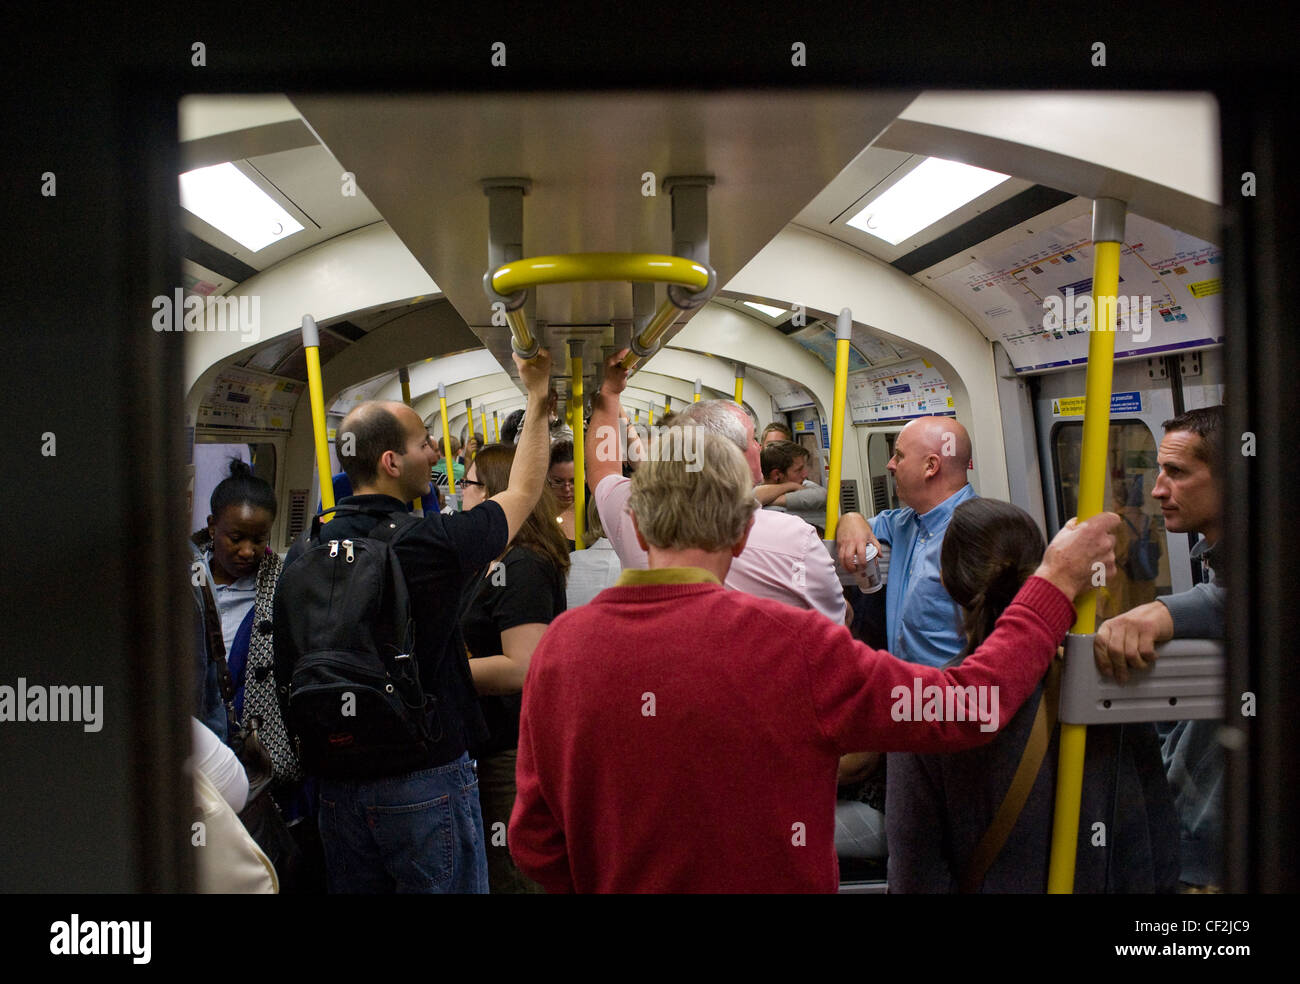 Commuters packed inside the carriage of a tube train on the London Underground. Stock Photo